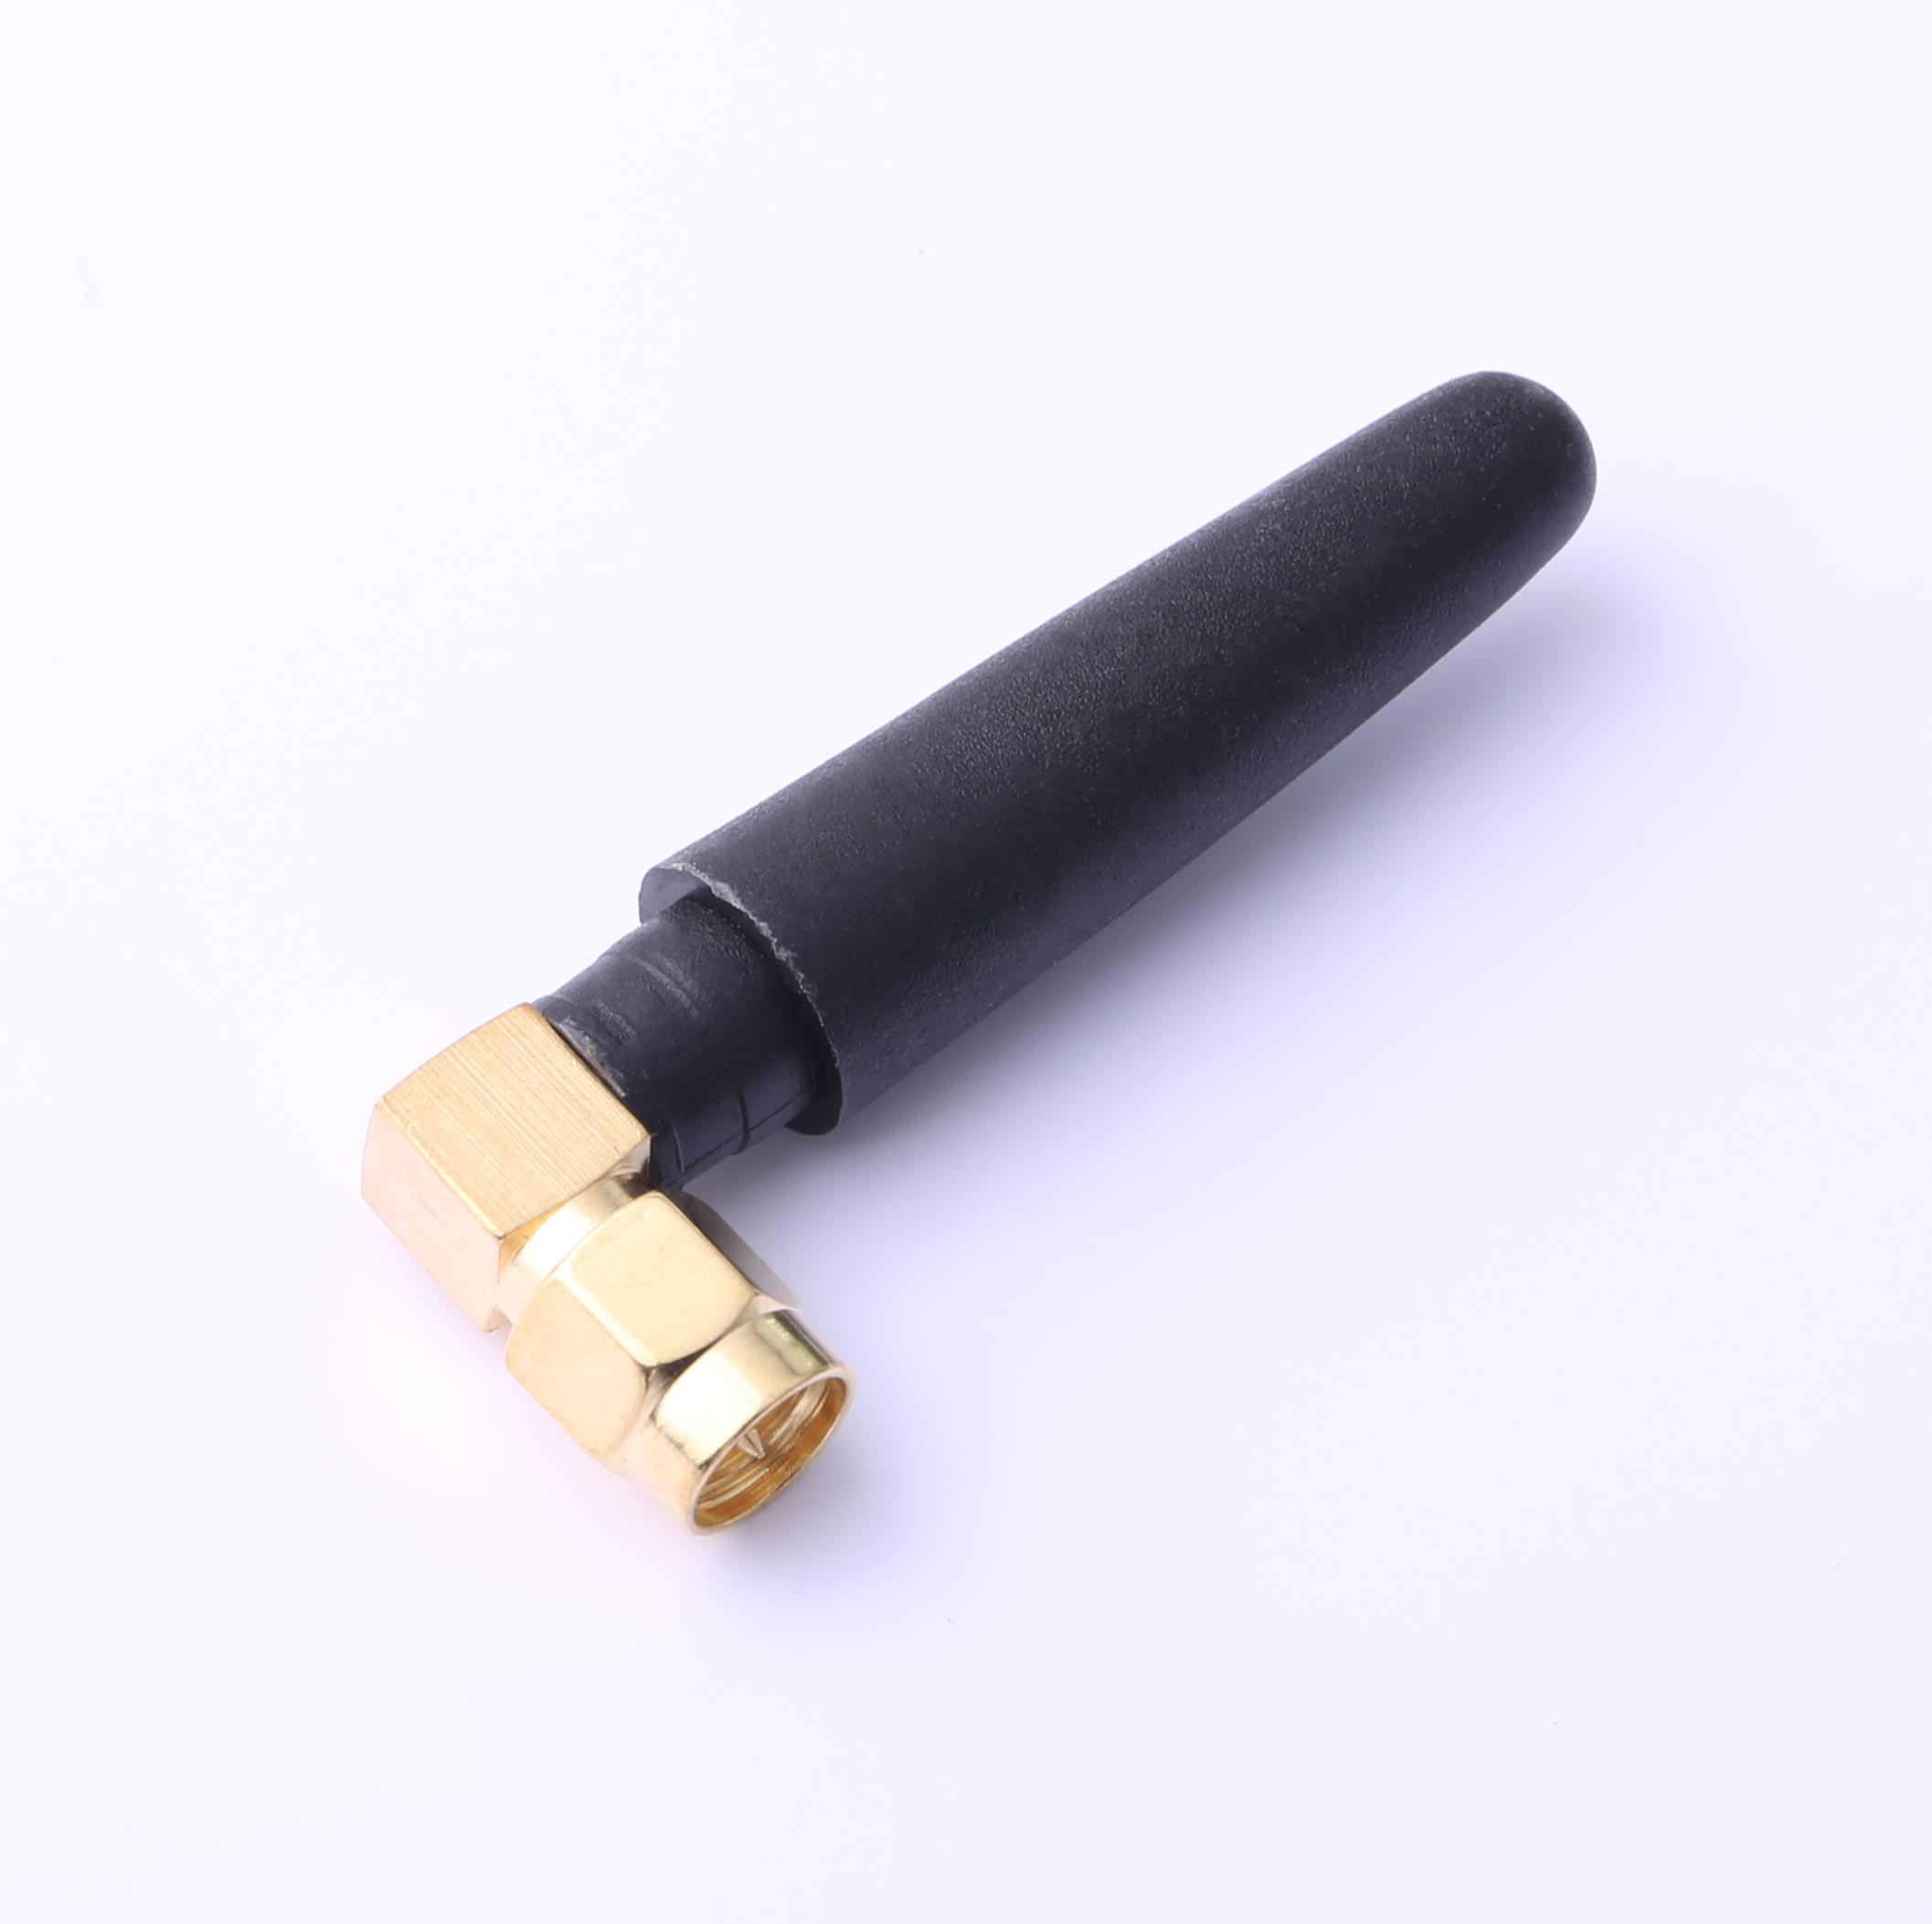 Small Pepper Floor-2.4G-WIFI Bluetooth-Gold-plated SMA elbow-KH- (2400) -K503-JB